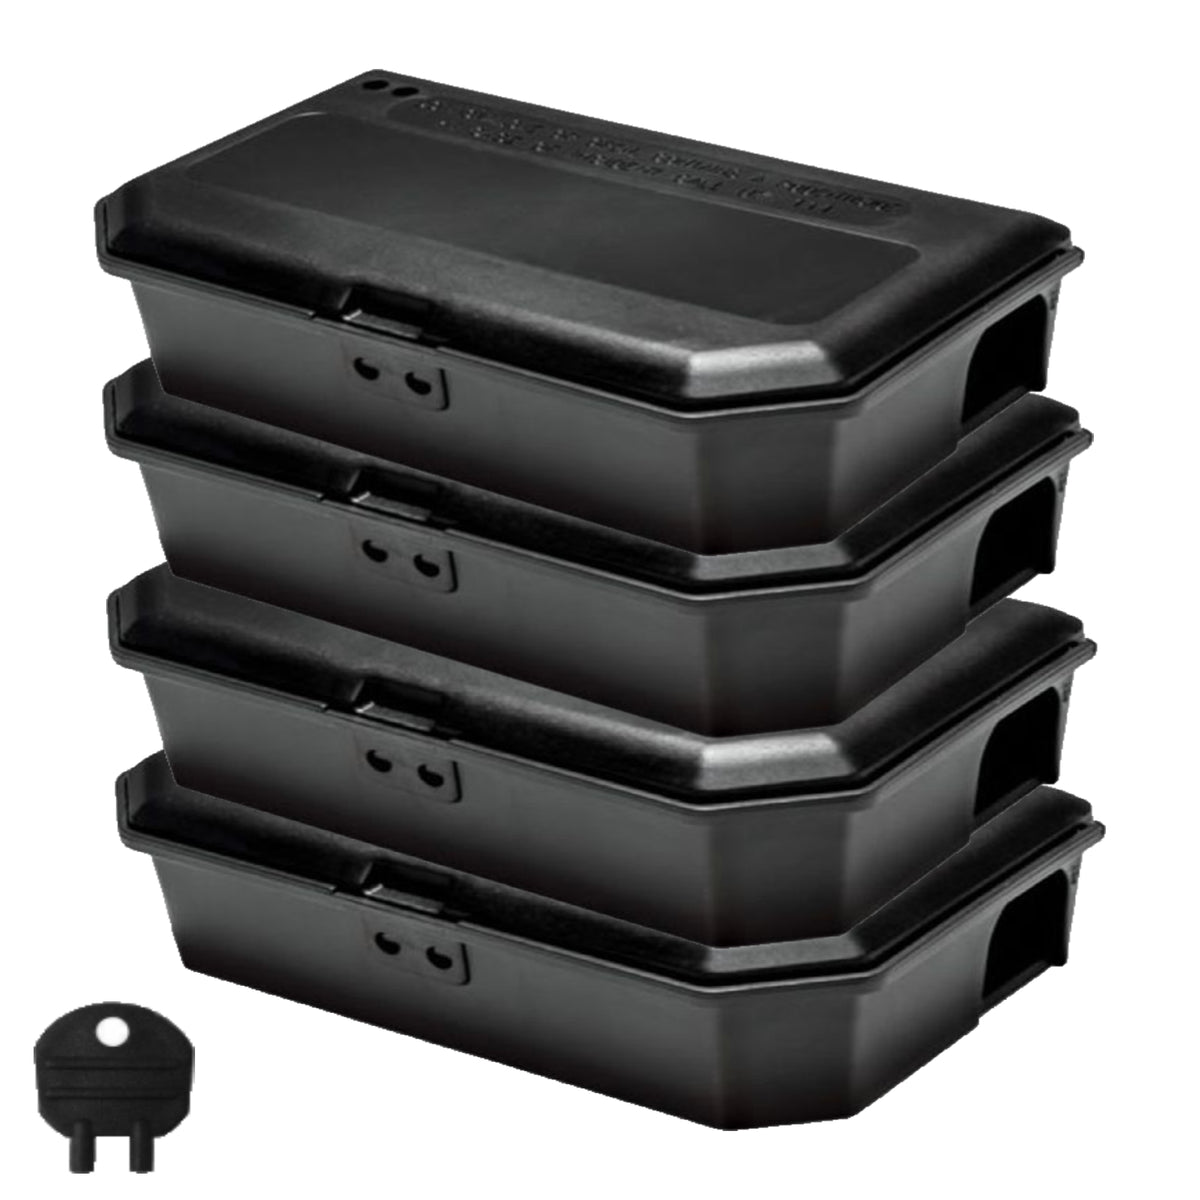 4 x Black Mouse Tamper-Resistant Bait Boxes - Holds Mice Poison Safely Away from Children & Pets (Empty - No Rodent Bait Included) - Moth Control